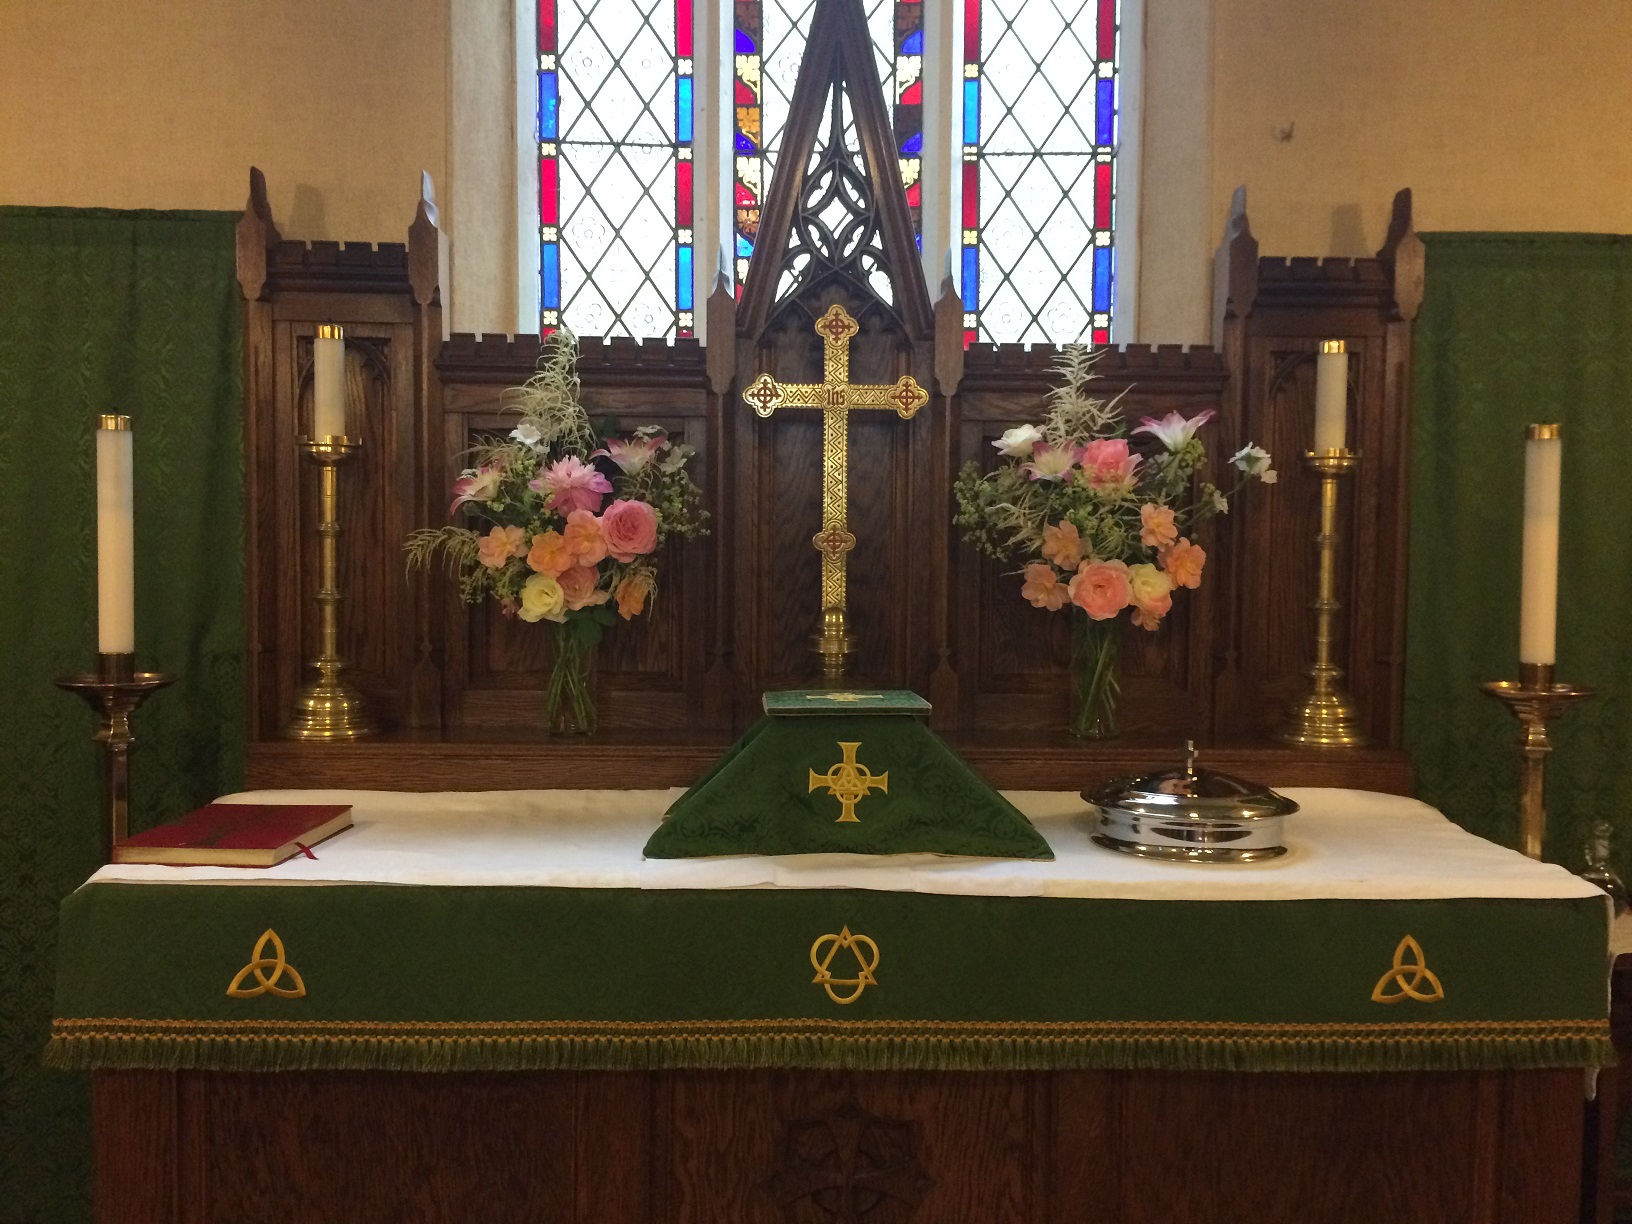 Flowers on the altar Sunday, July 9th.